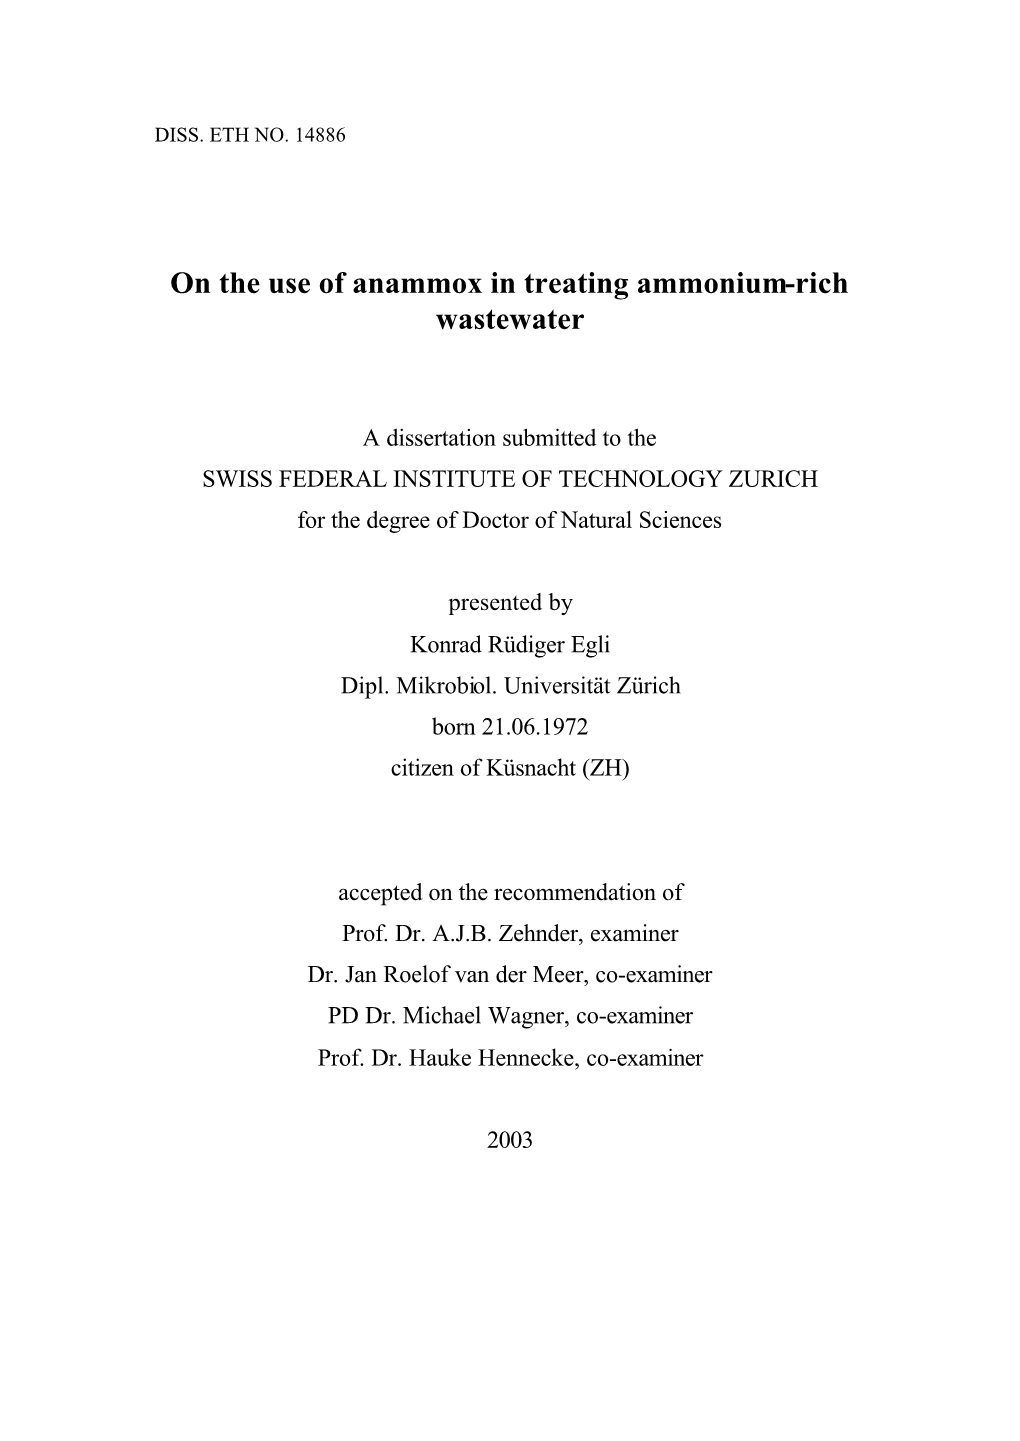 On the Use of Anammox in Treating Ammonium-Rich Wastewater